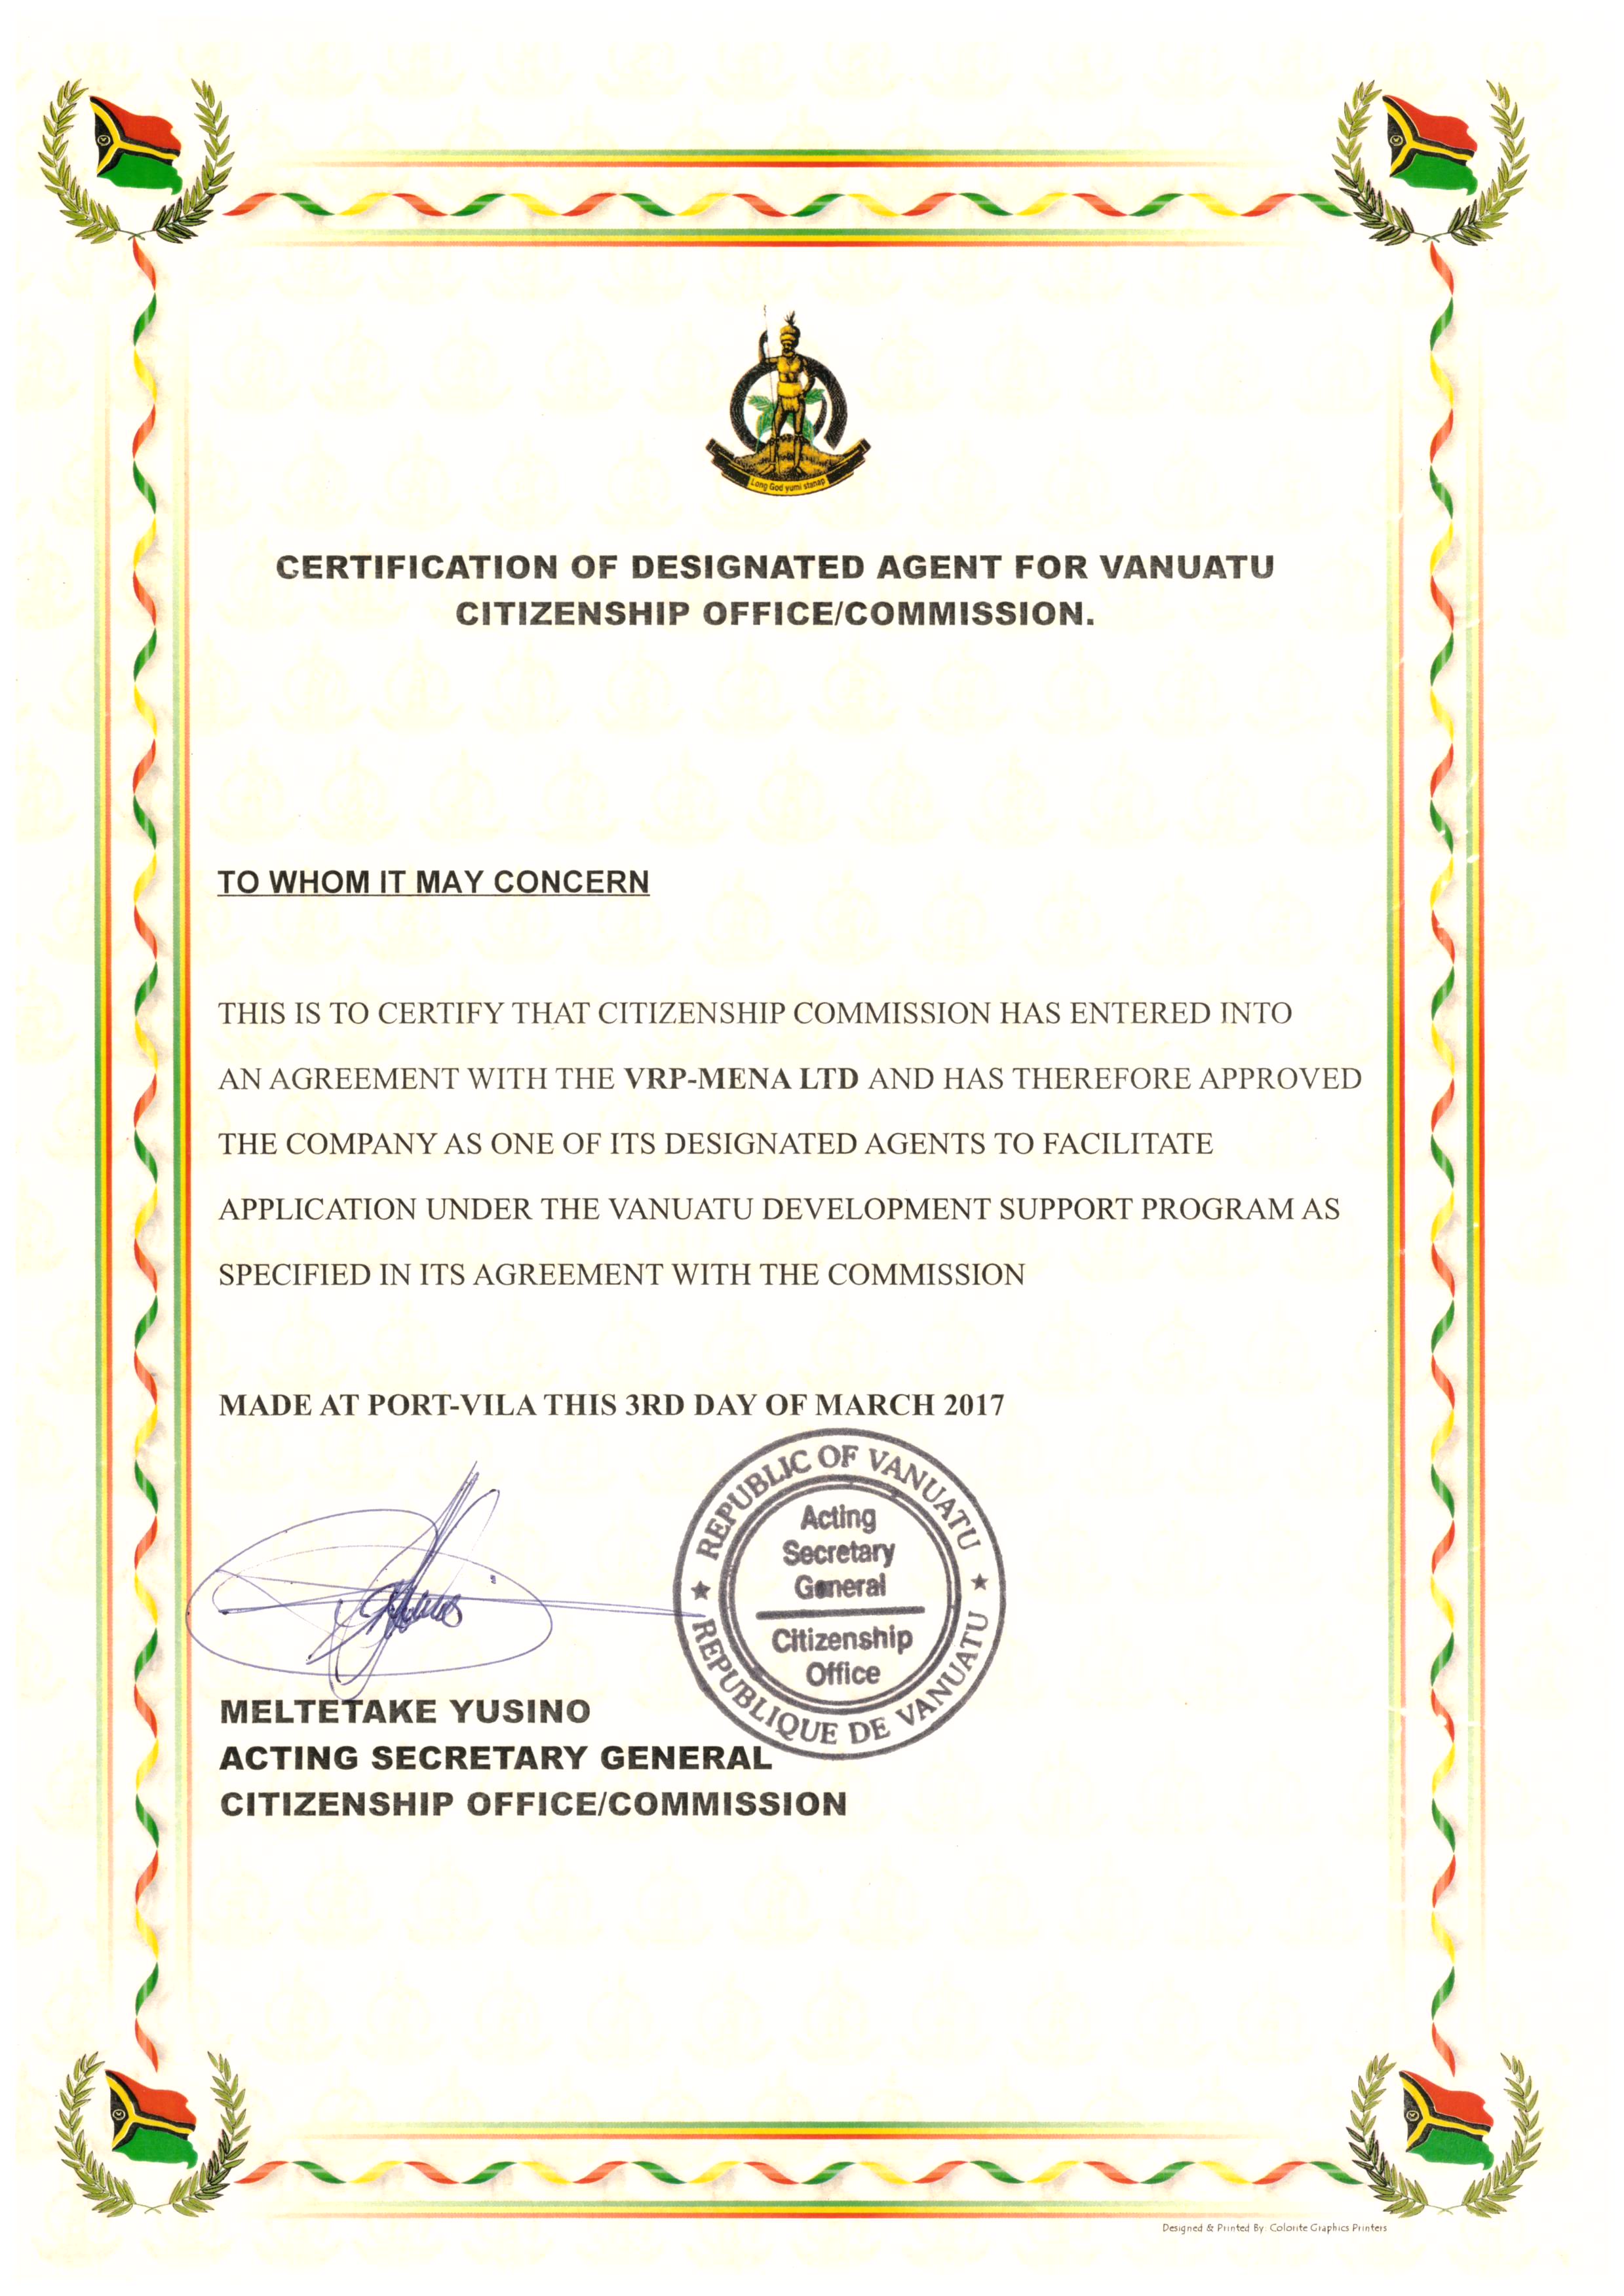 CERTIFICATION FROM VANUATU CITIZENSHIP OFFICE COMMISSION